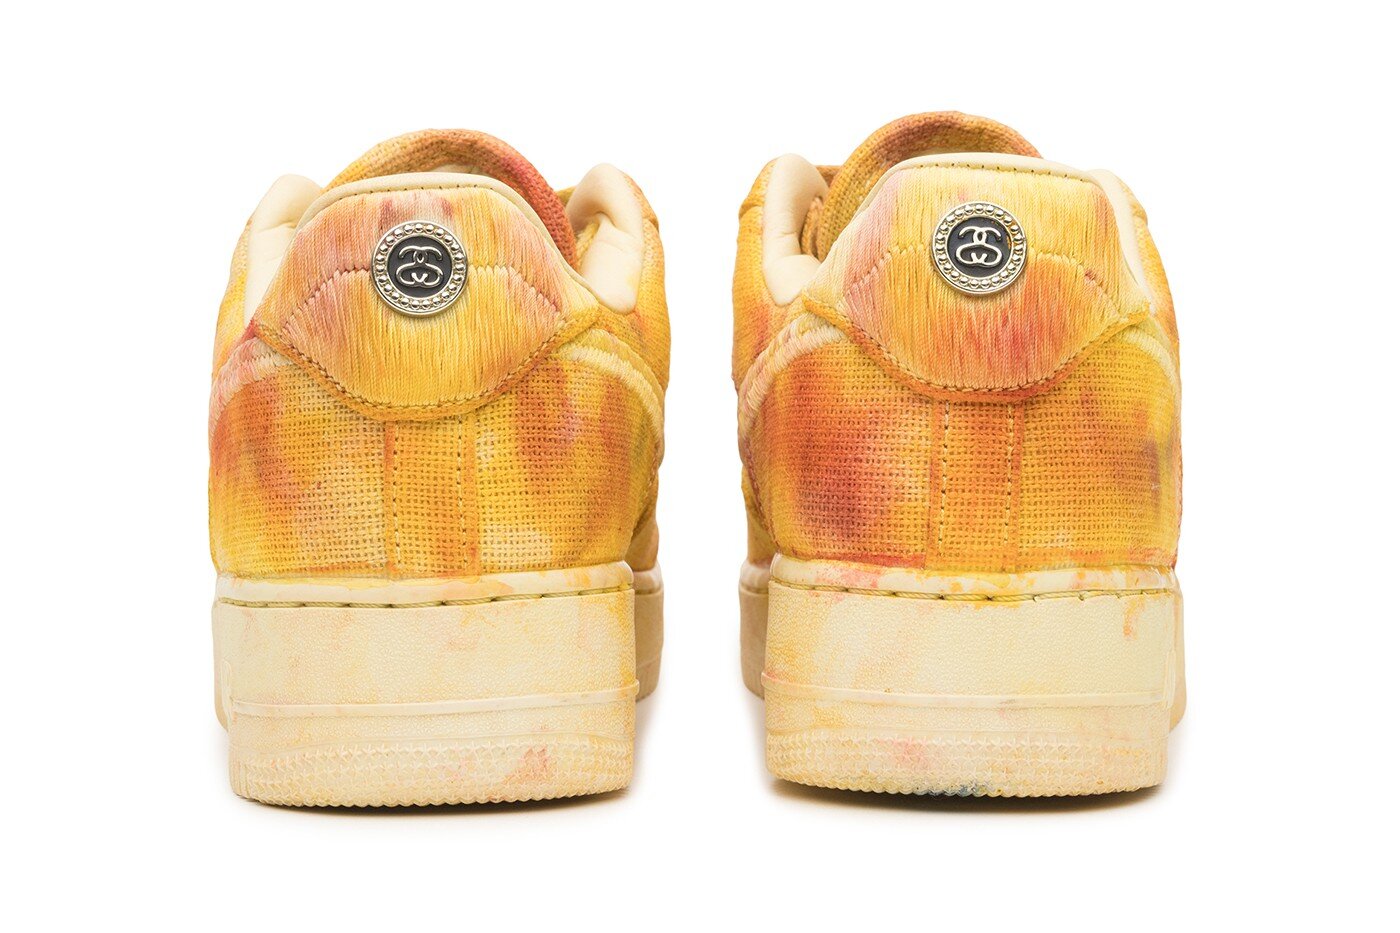 Nike x Stussy release new sustainable hand-dyed Air force 1 